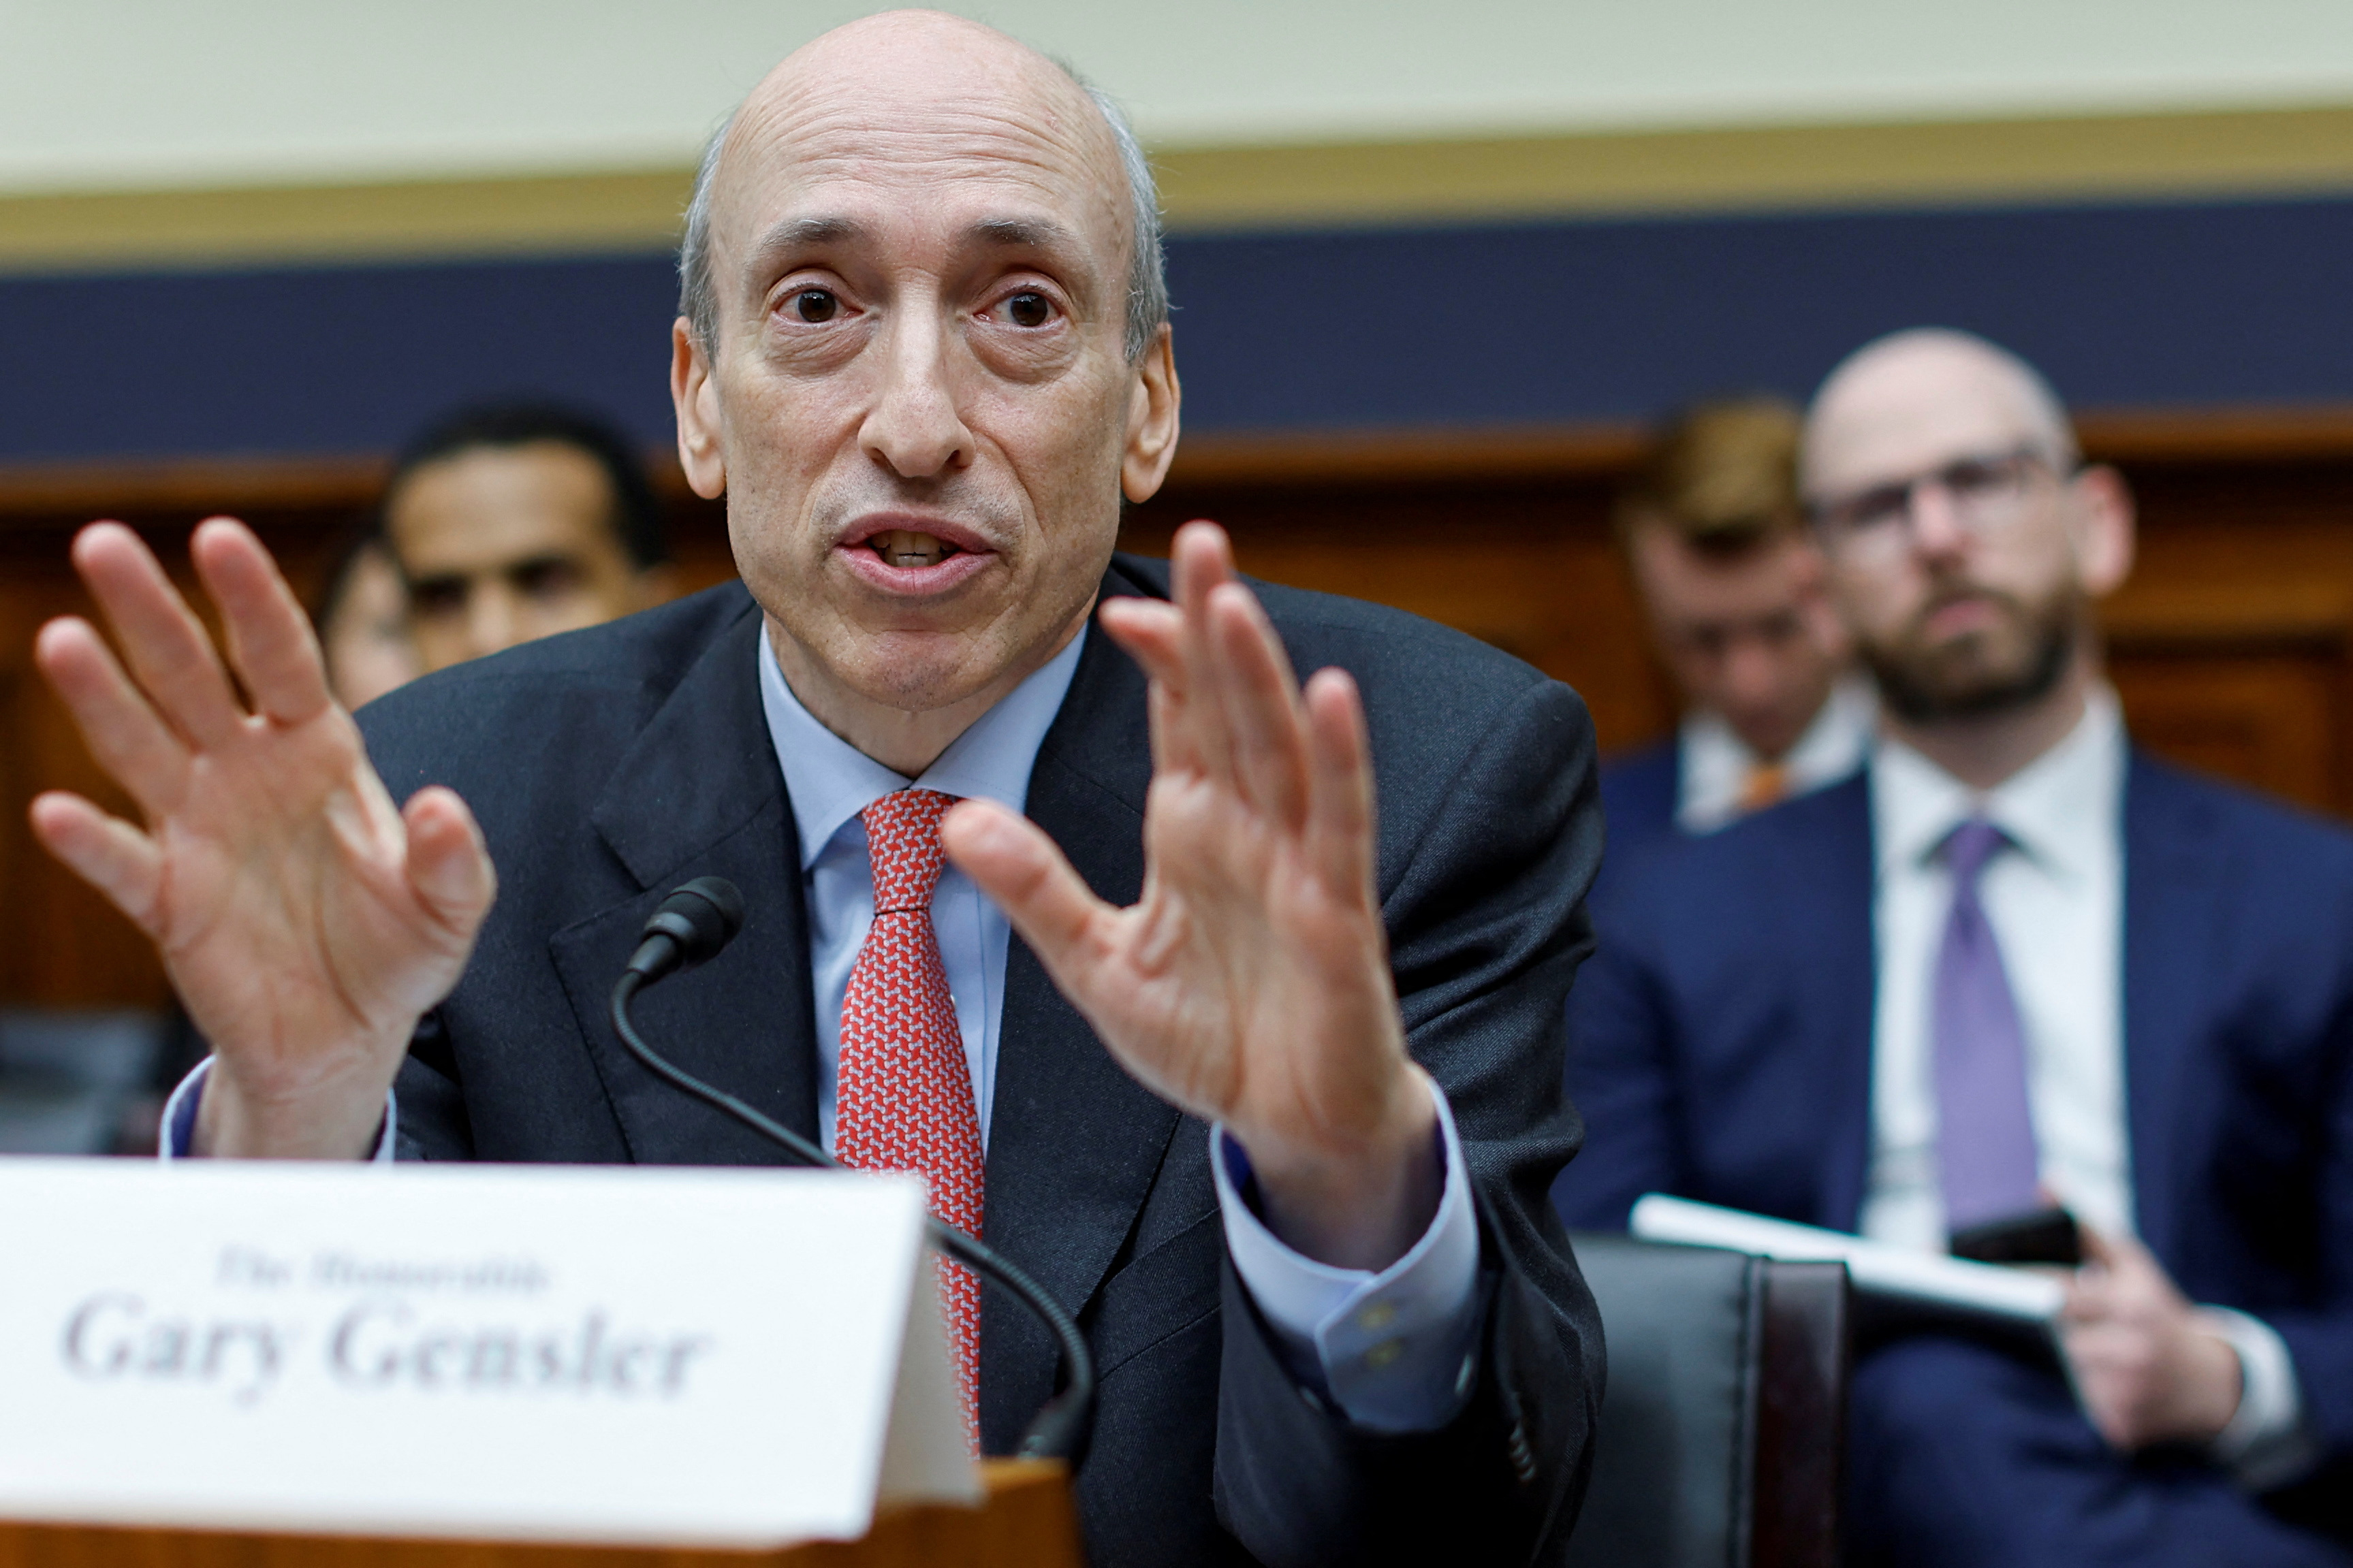 U.S. Securities and Exchange Commission (SEC) Chairman Gensler testifies on Capitol Hill in Washington